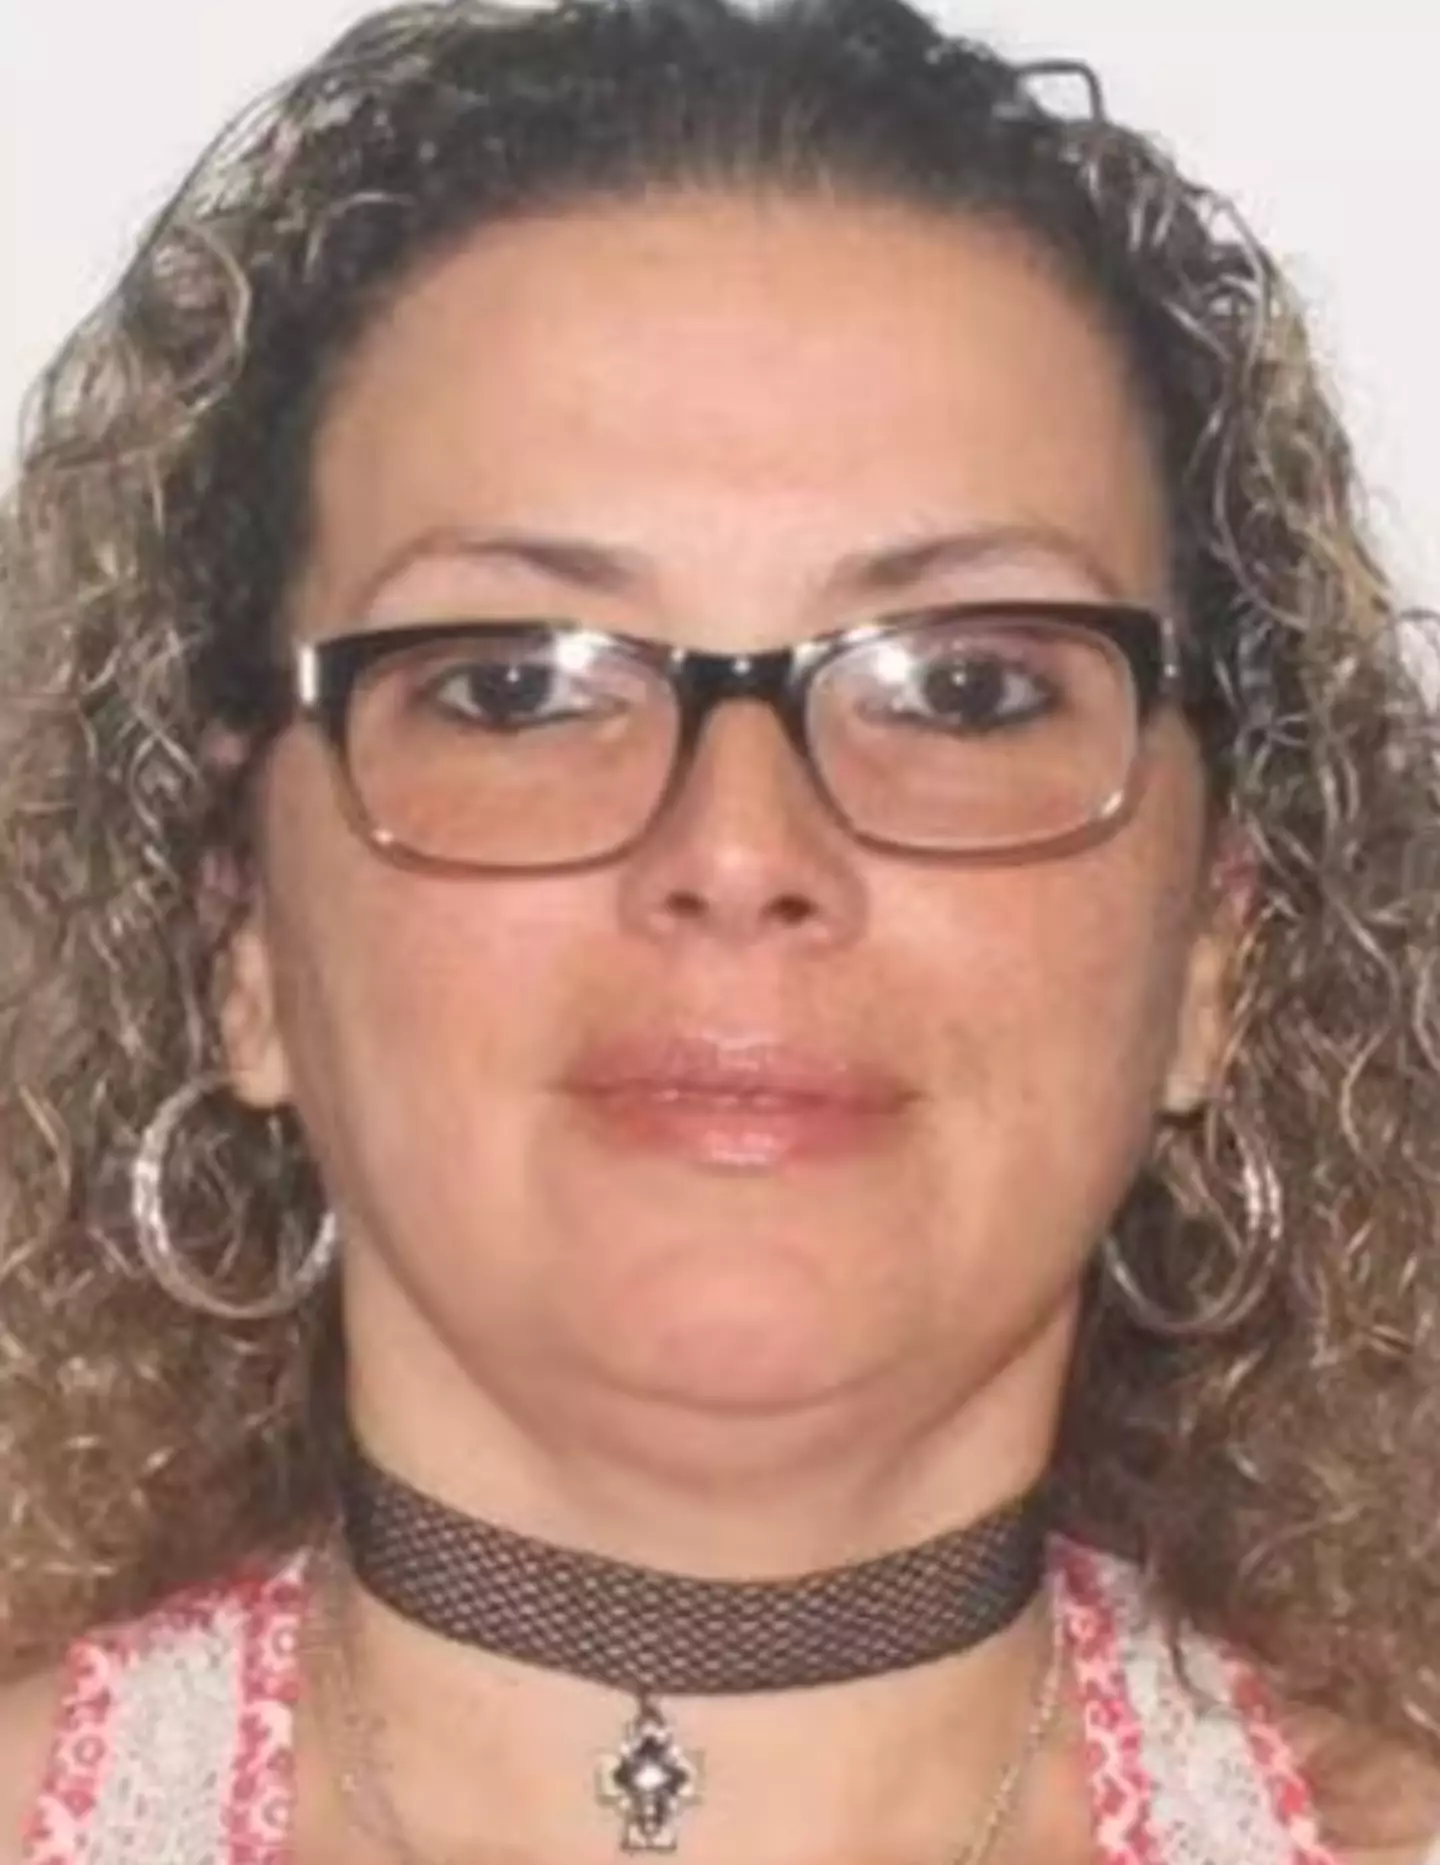 Marlene Lopez was reported missing on Wednesday (6 March).